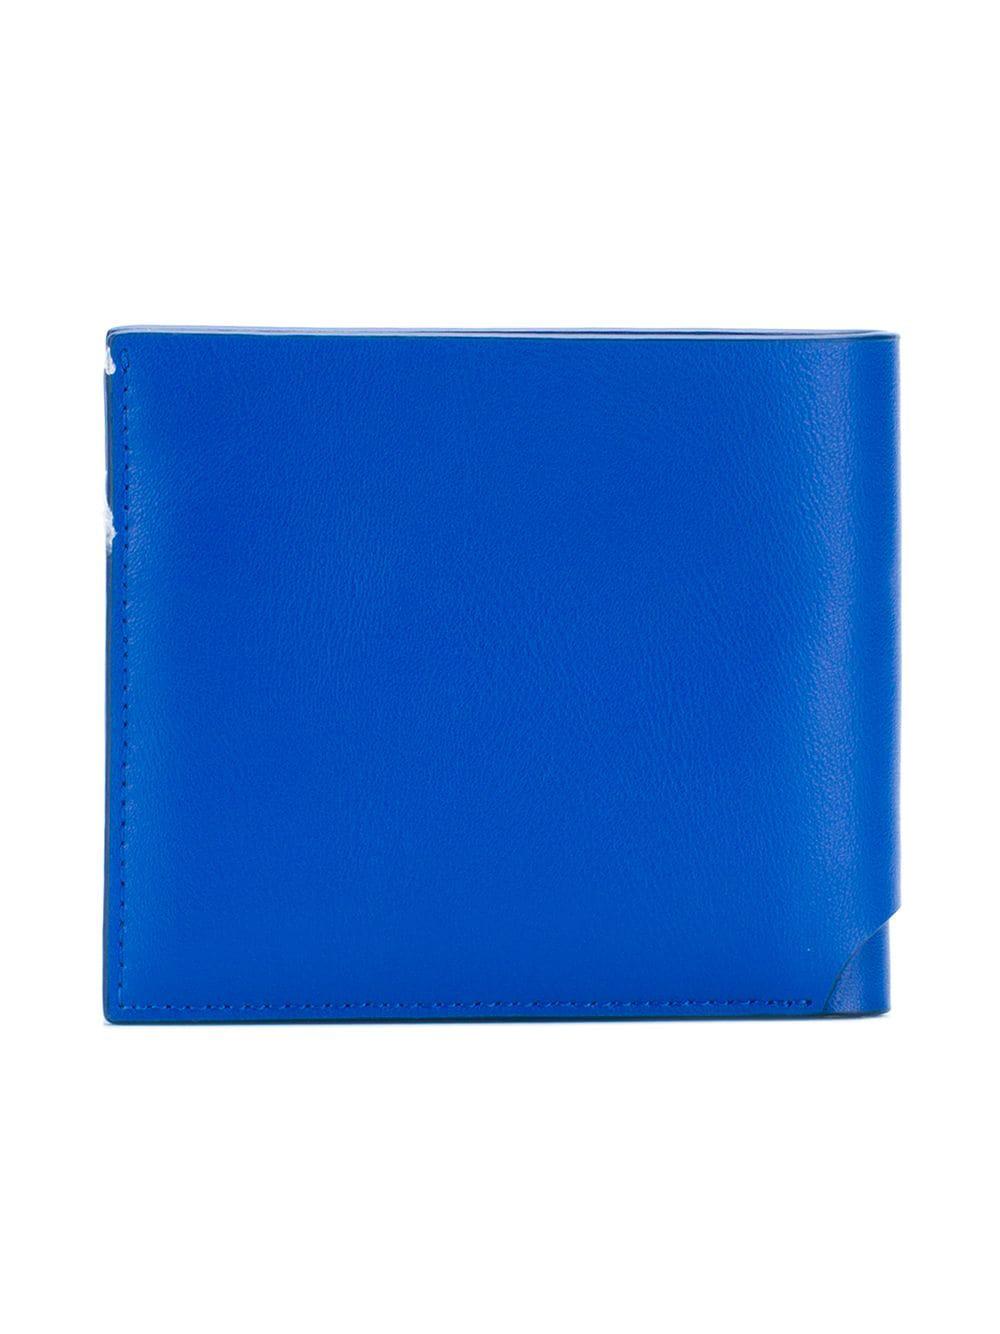 KENZO 'jumping Tiger' Leather Wallet in Blue for Men - Lyst